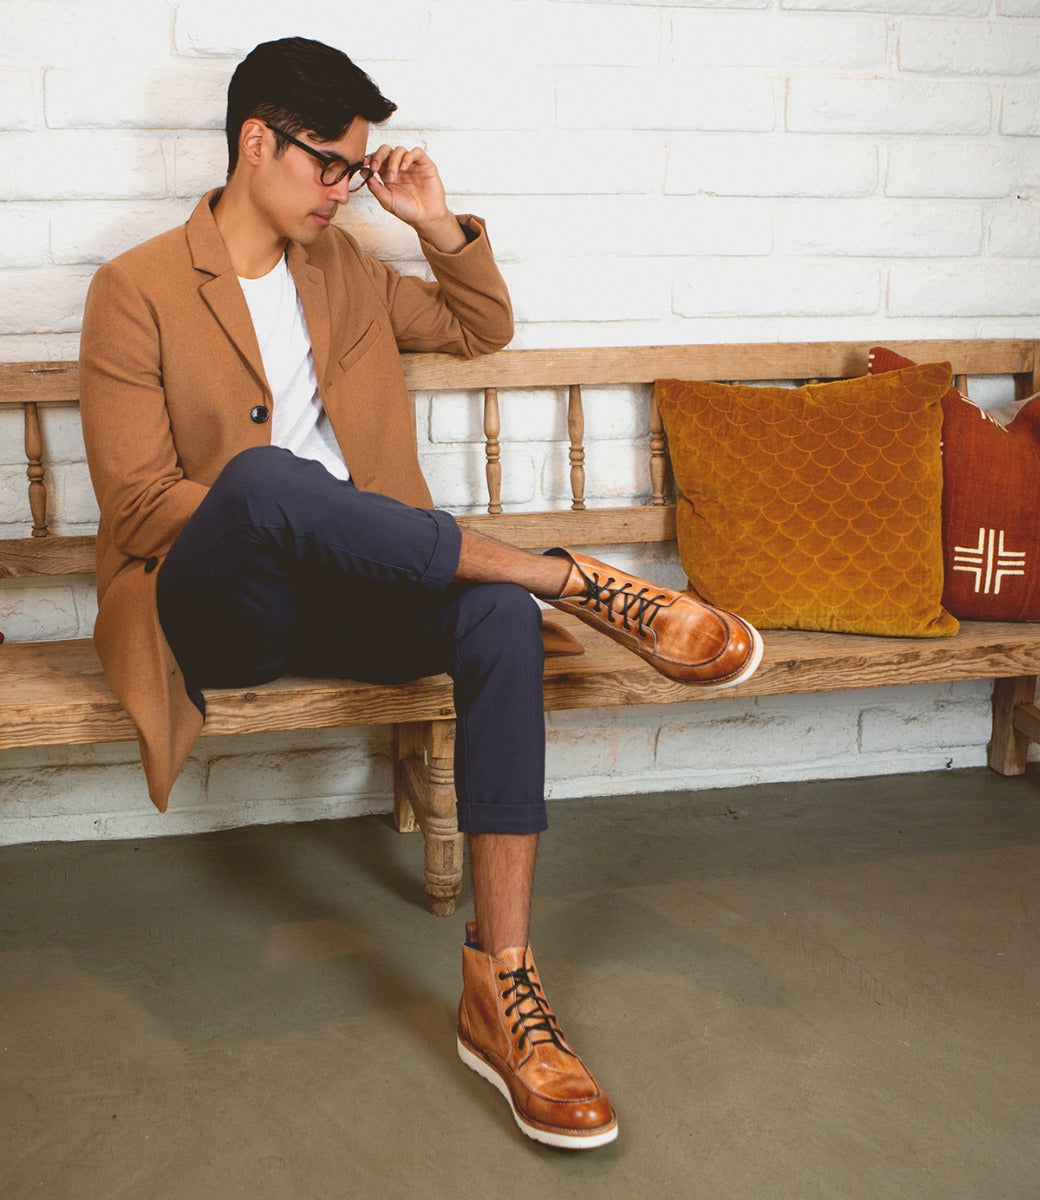 Man in a tan jacket and blue pants adjusting his glasses while sitting on a wooden bench with decorative pillows, wearing Bed Stu Lincoln men's leather boots.